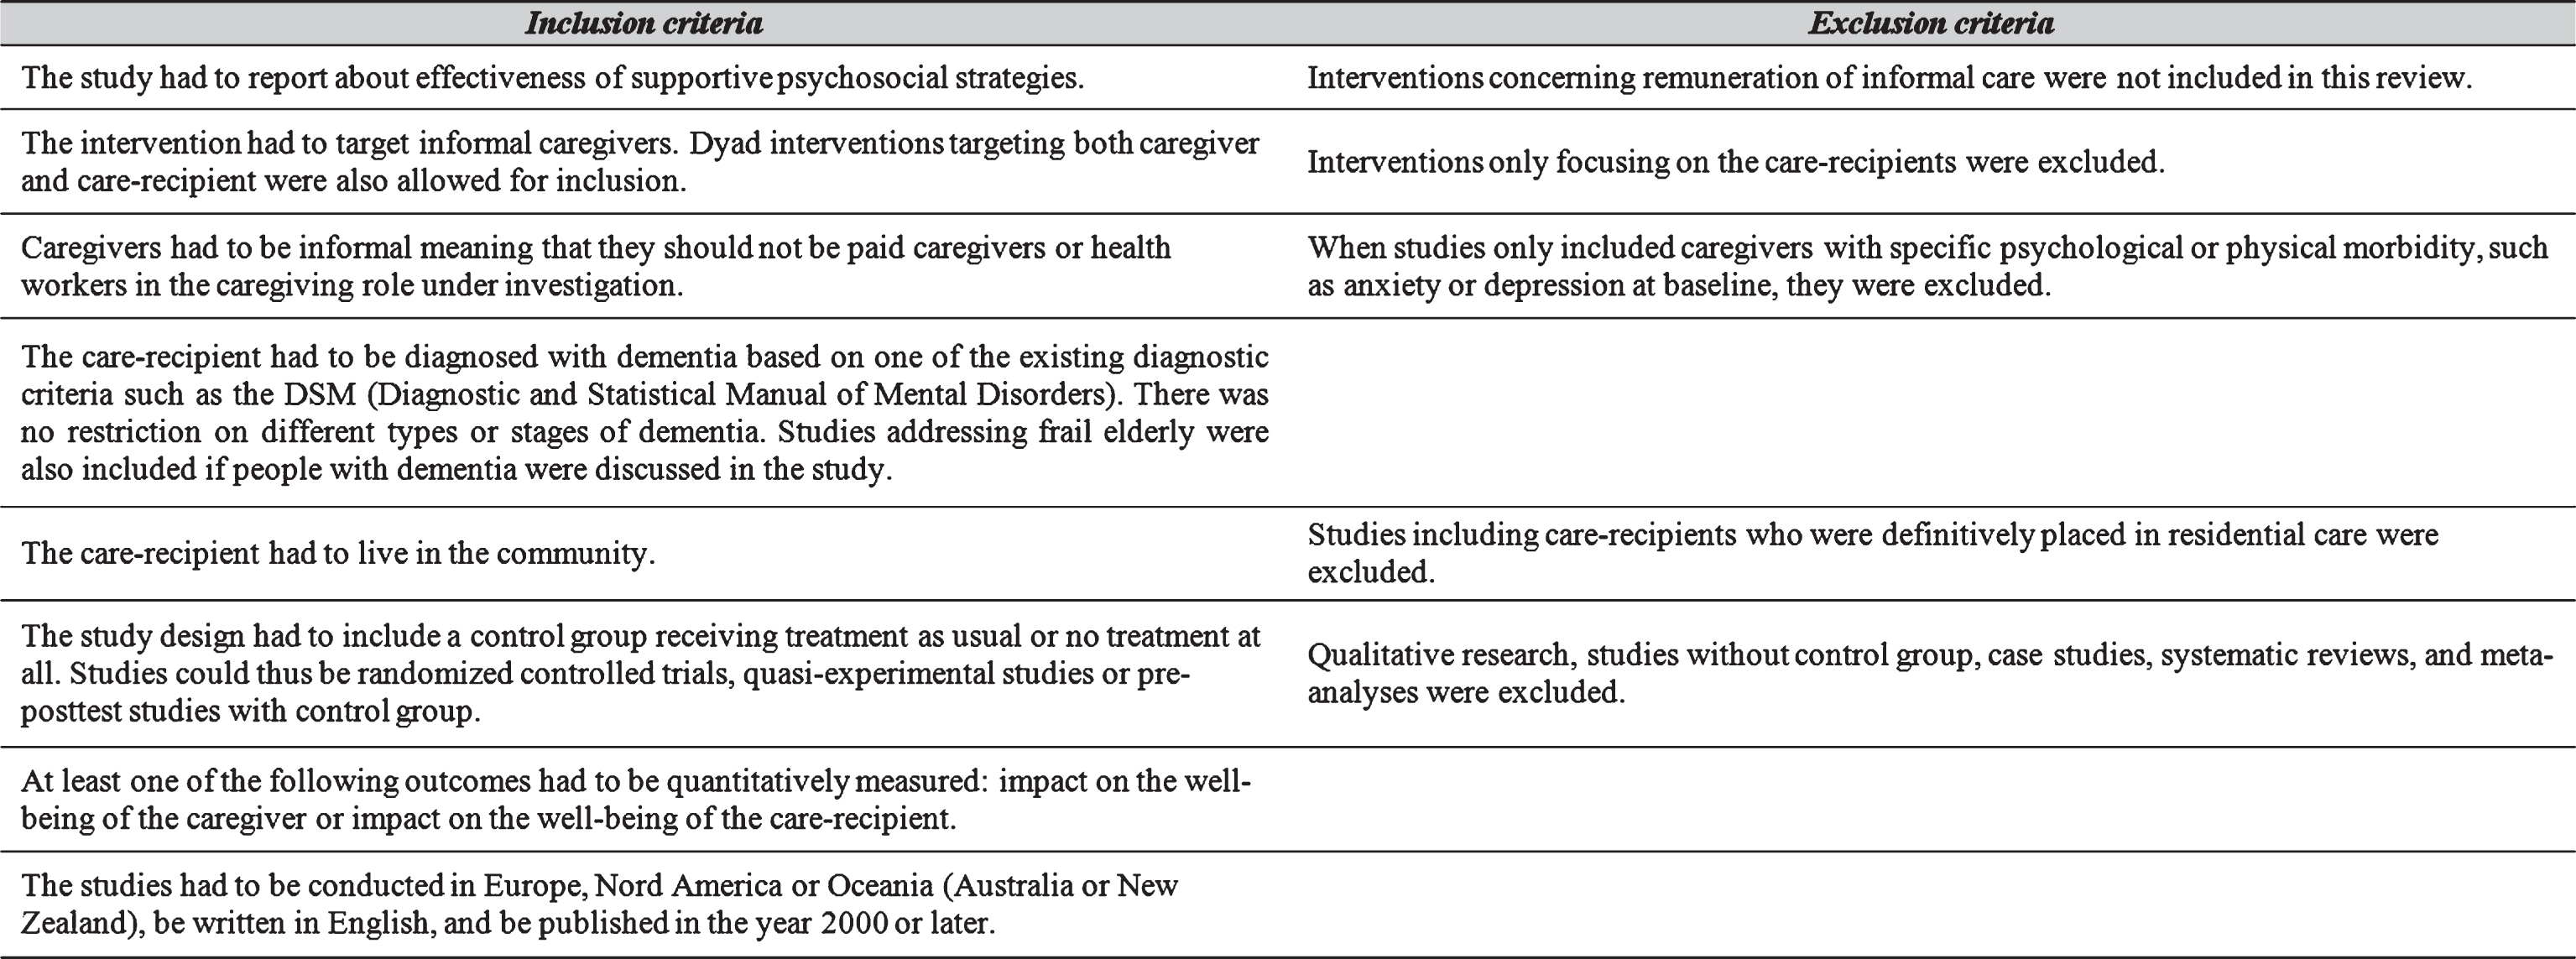 Inclusion and exclusion criteria of this review.